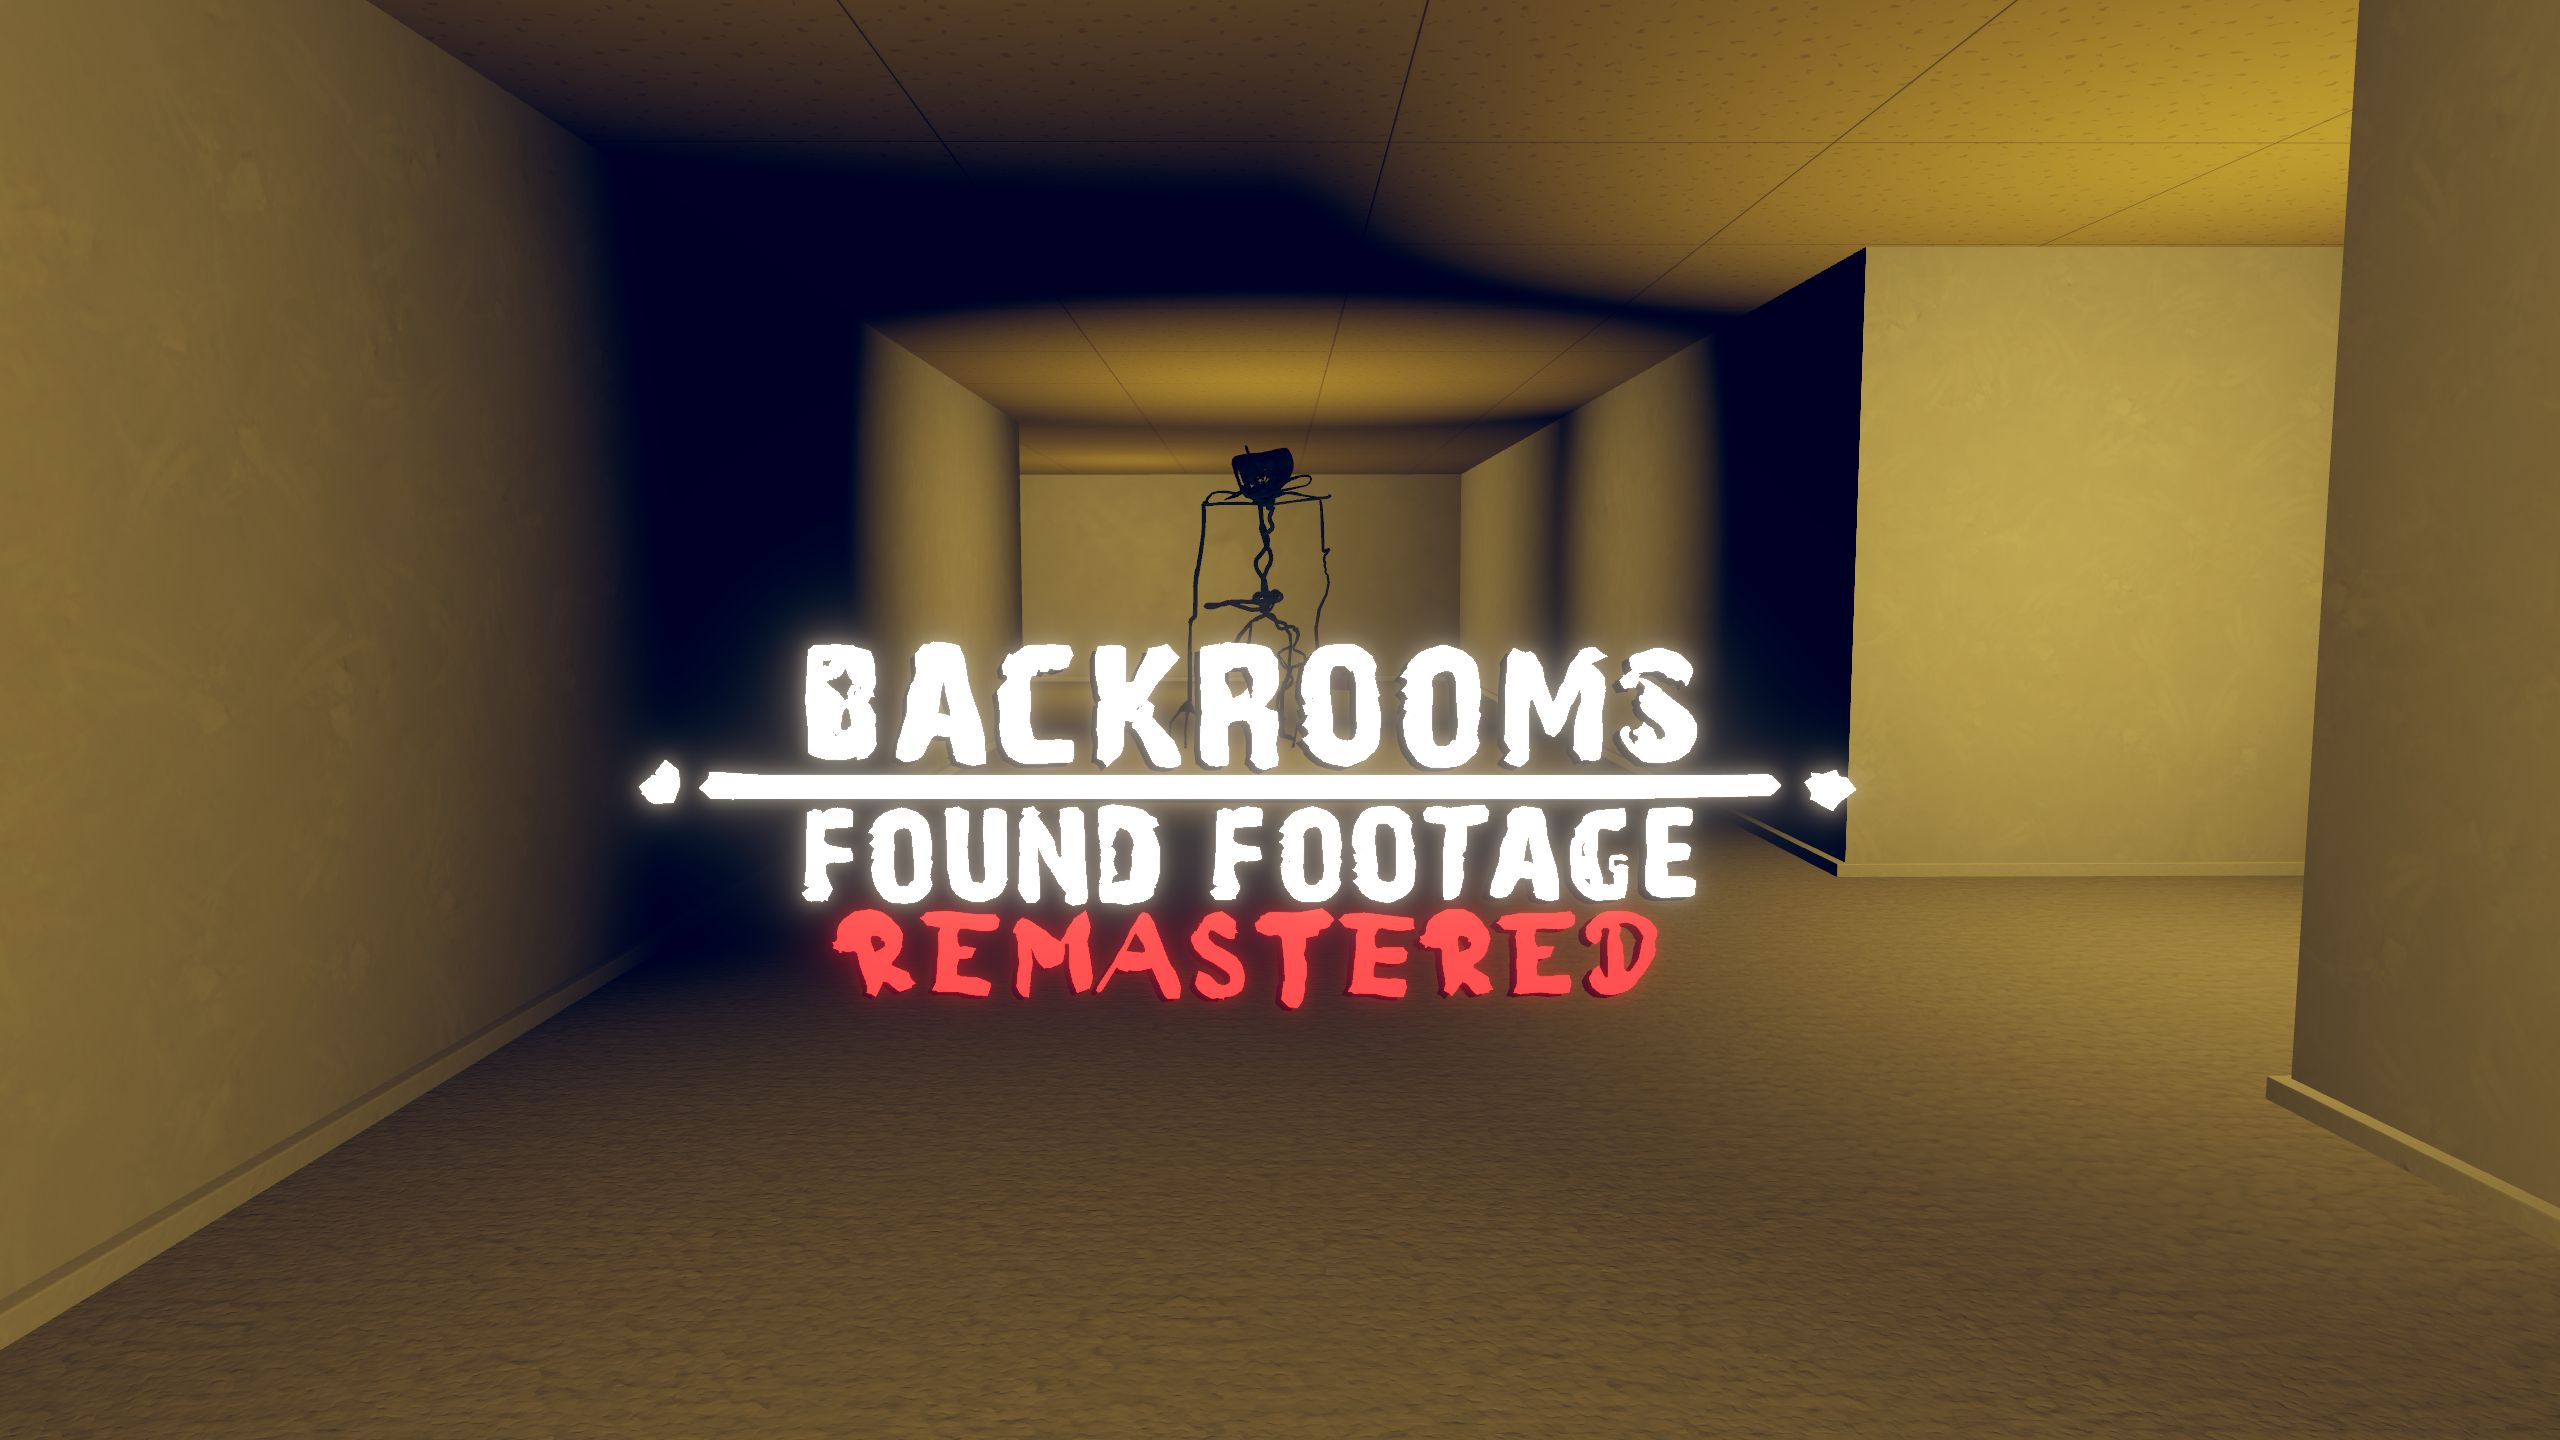 The Backrooms - Level 2 (Found Footage) 